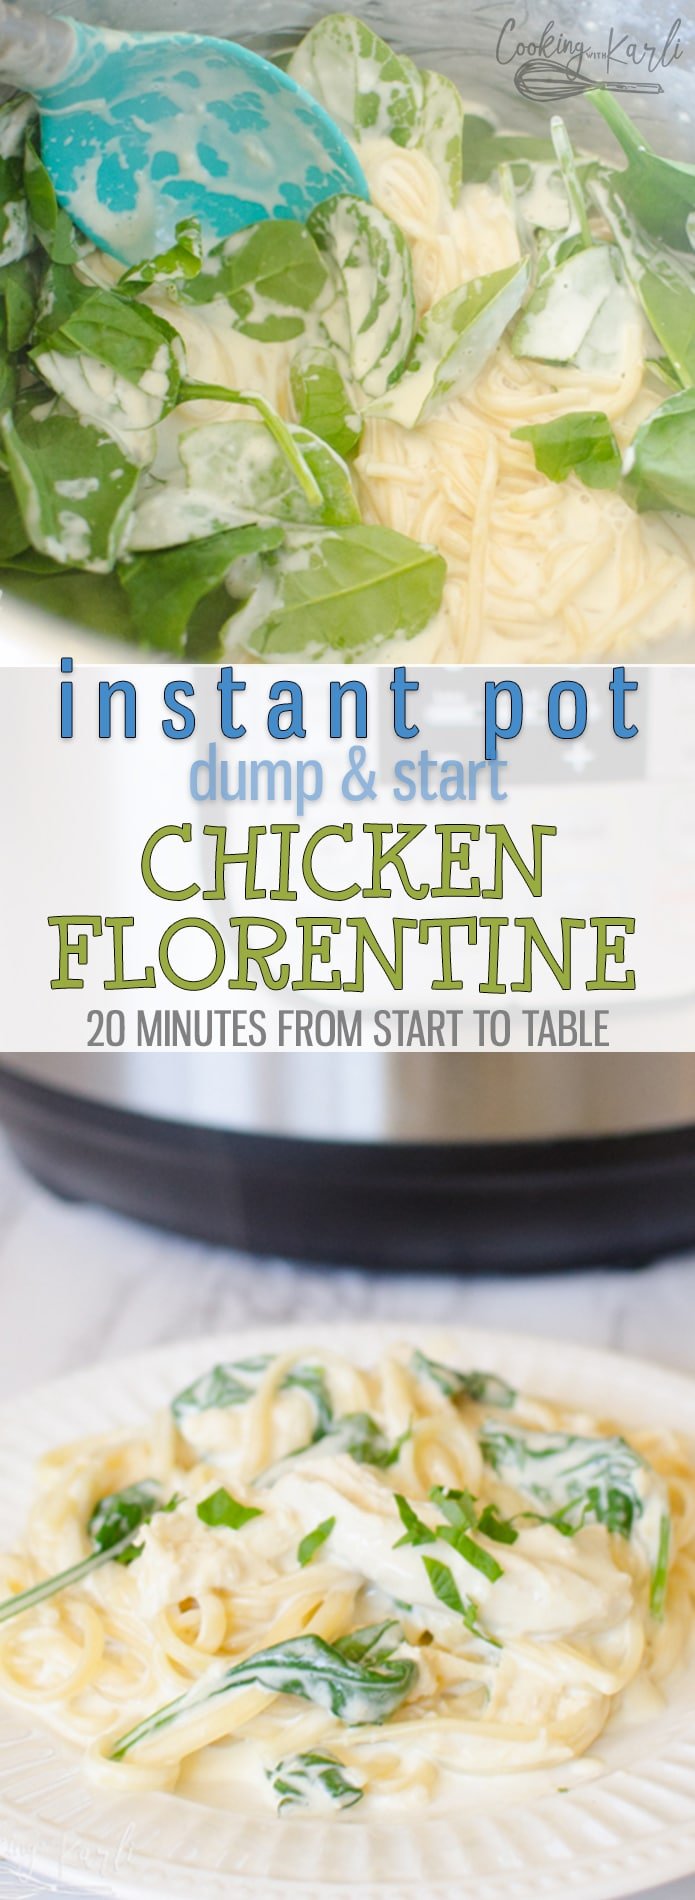 Instant Pot Chicken Florentine is a fast, easy Dump and Start meal. This is the perfect weeknight meal because it is on the table in 20 minutes! The pasta, chicken and spinach are covered in a creamy parmesan cheese and garlic sauce. Instant Pot Chicken Florentine will be your families new go-to meal! |Cooking with Karli| #pasta #instantpot #fast #easy #30minutemeal #weeknight 